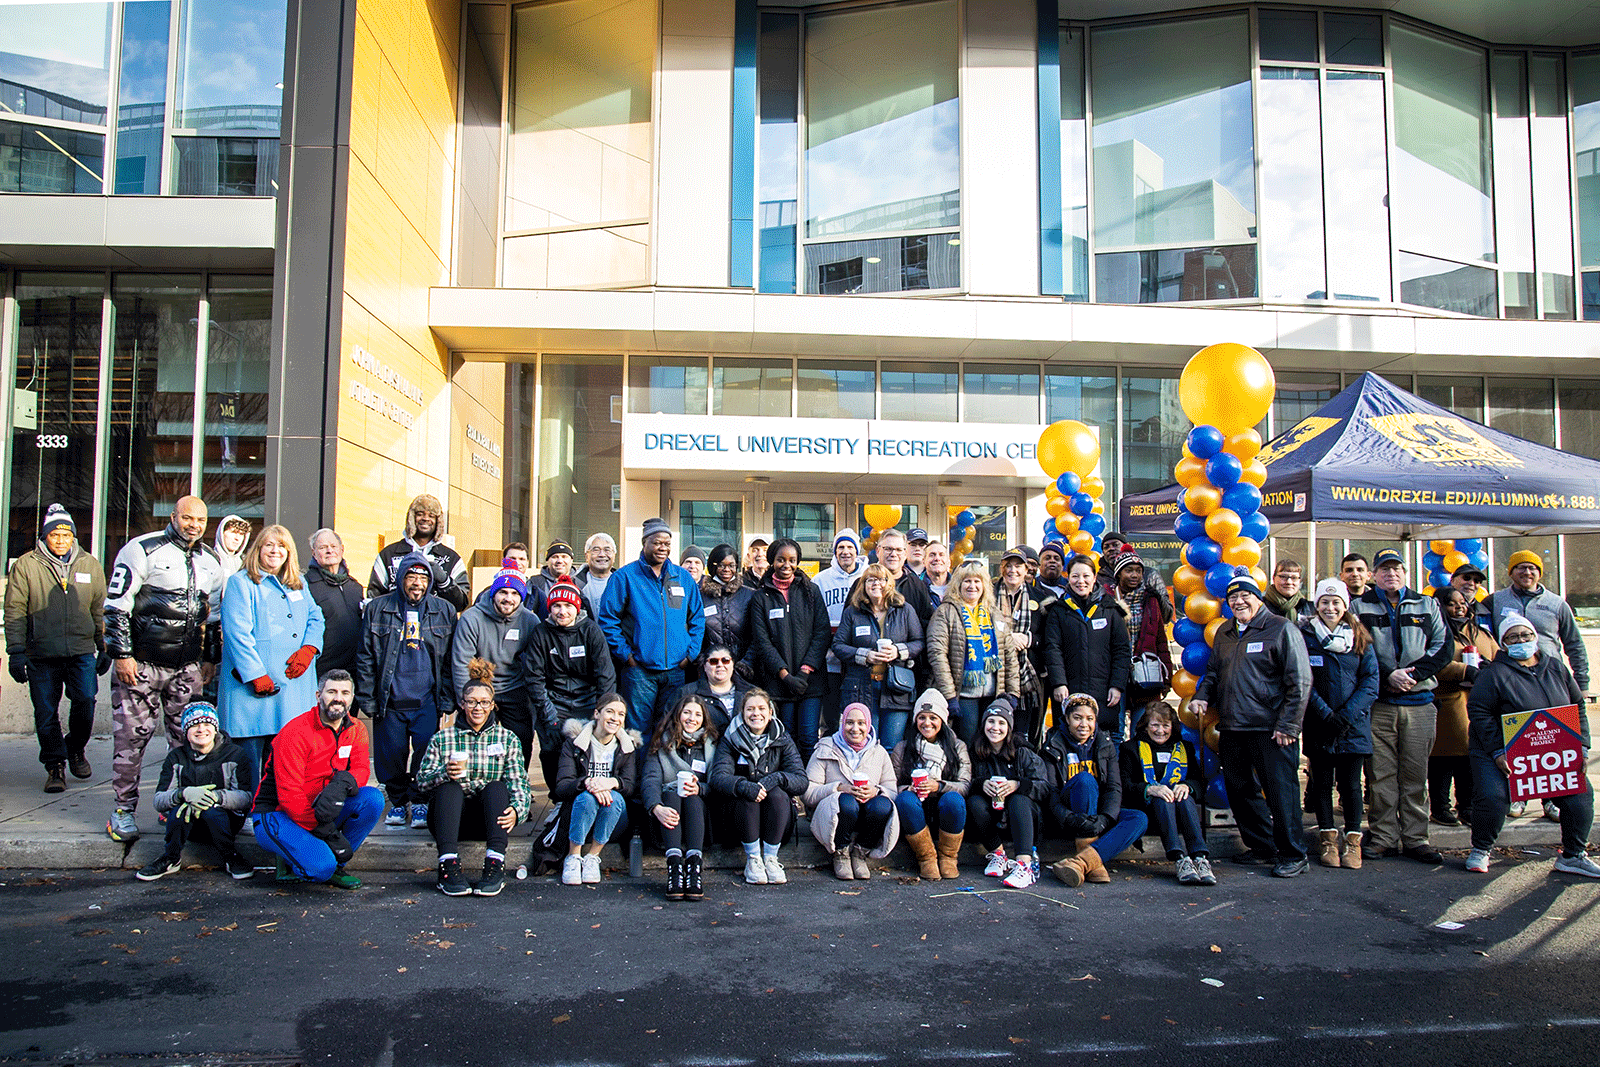 A gift. Volunteers from the packing day for the Active-Duty Military Care Package Drive on Dec. 2. A large group of alumni and volunteers in front of the Drexel Recreation Center during the turkey distribution day on Dec. 19.